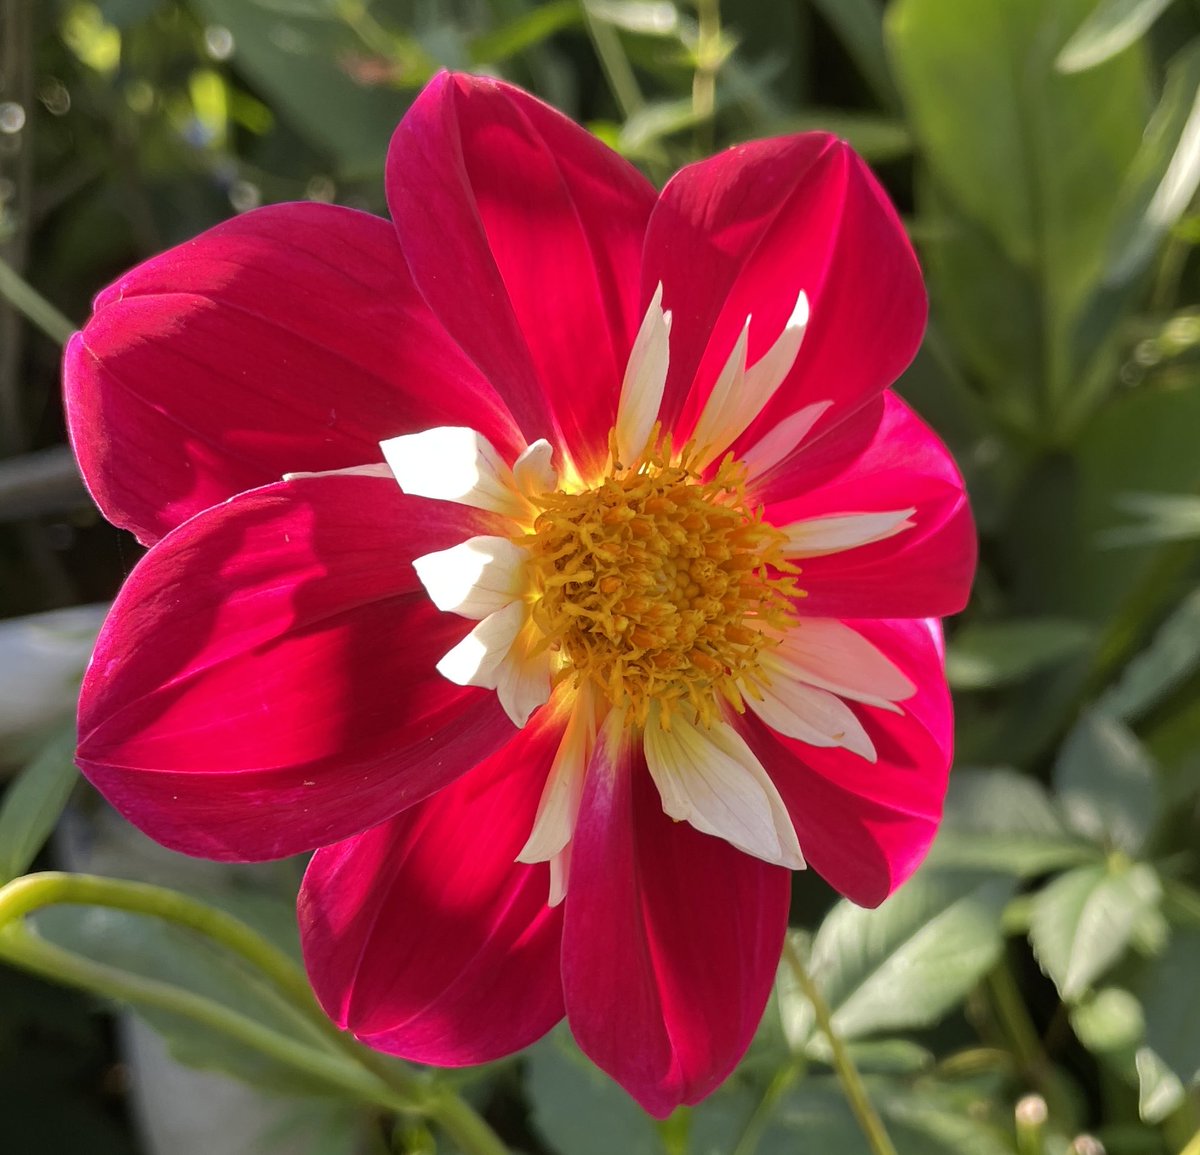 This dahlia… like a stained glass window in the sun